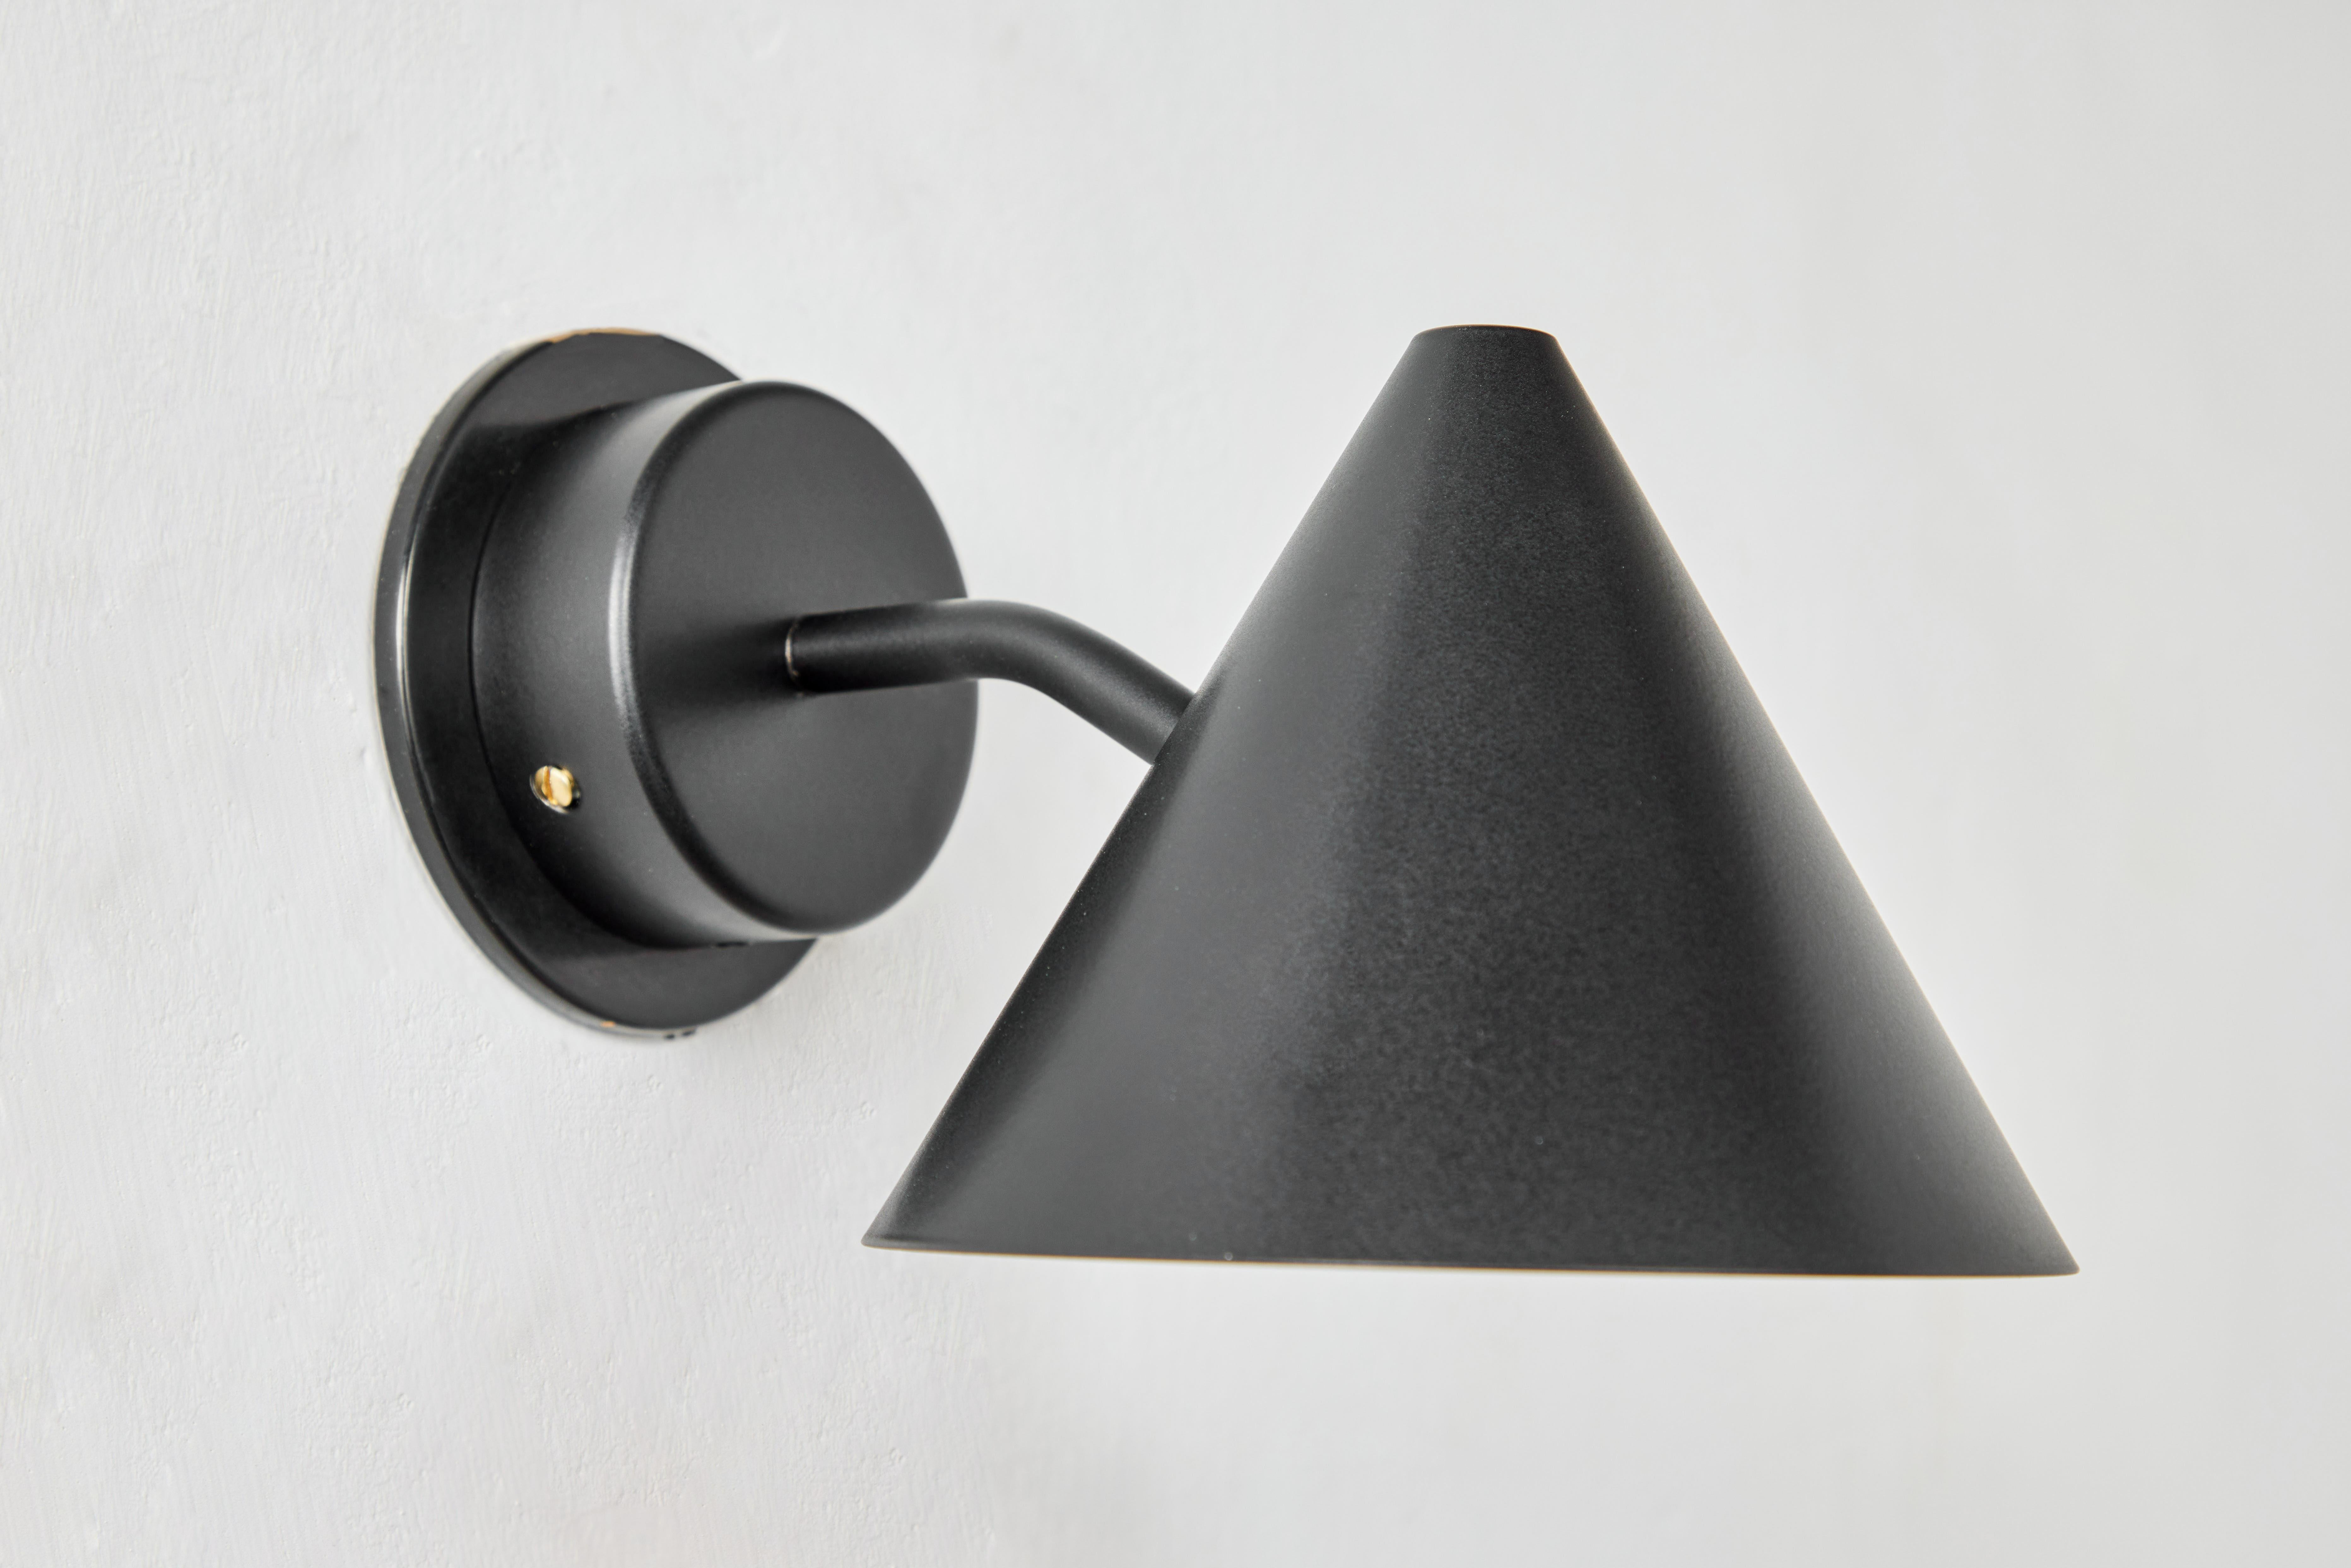 Hans-Agne Jakobsson 'Mini-Tratten' outdoor sconce in black. An exclusive made for U.S. and UL listed authorized re-edition of the classic Swedish design executed in black painted metal shade with black painted interior and brass hardware. An